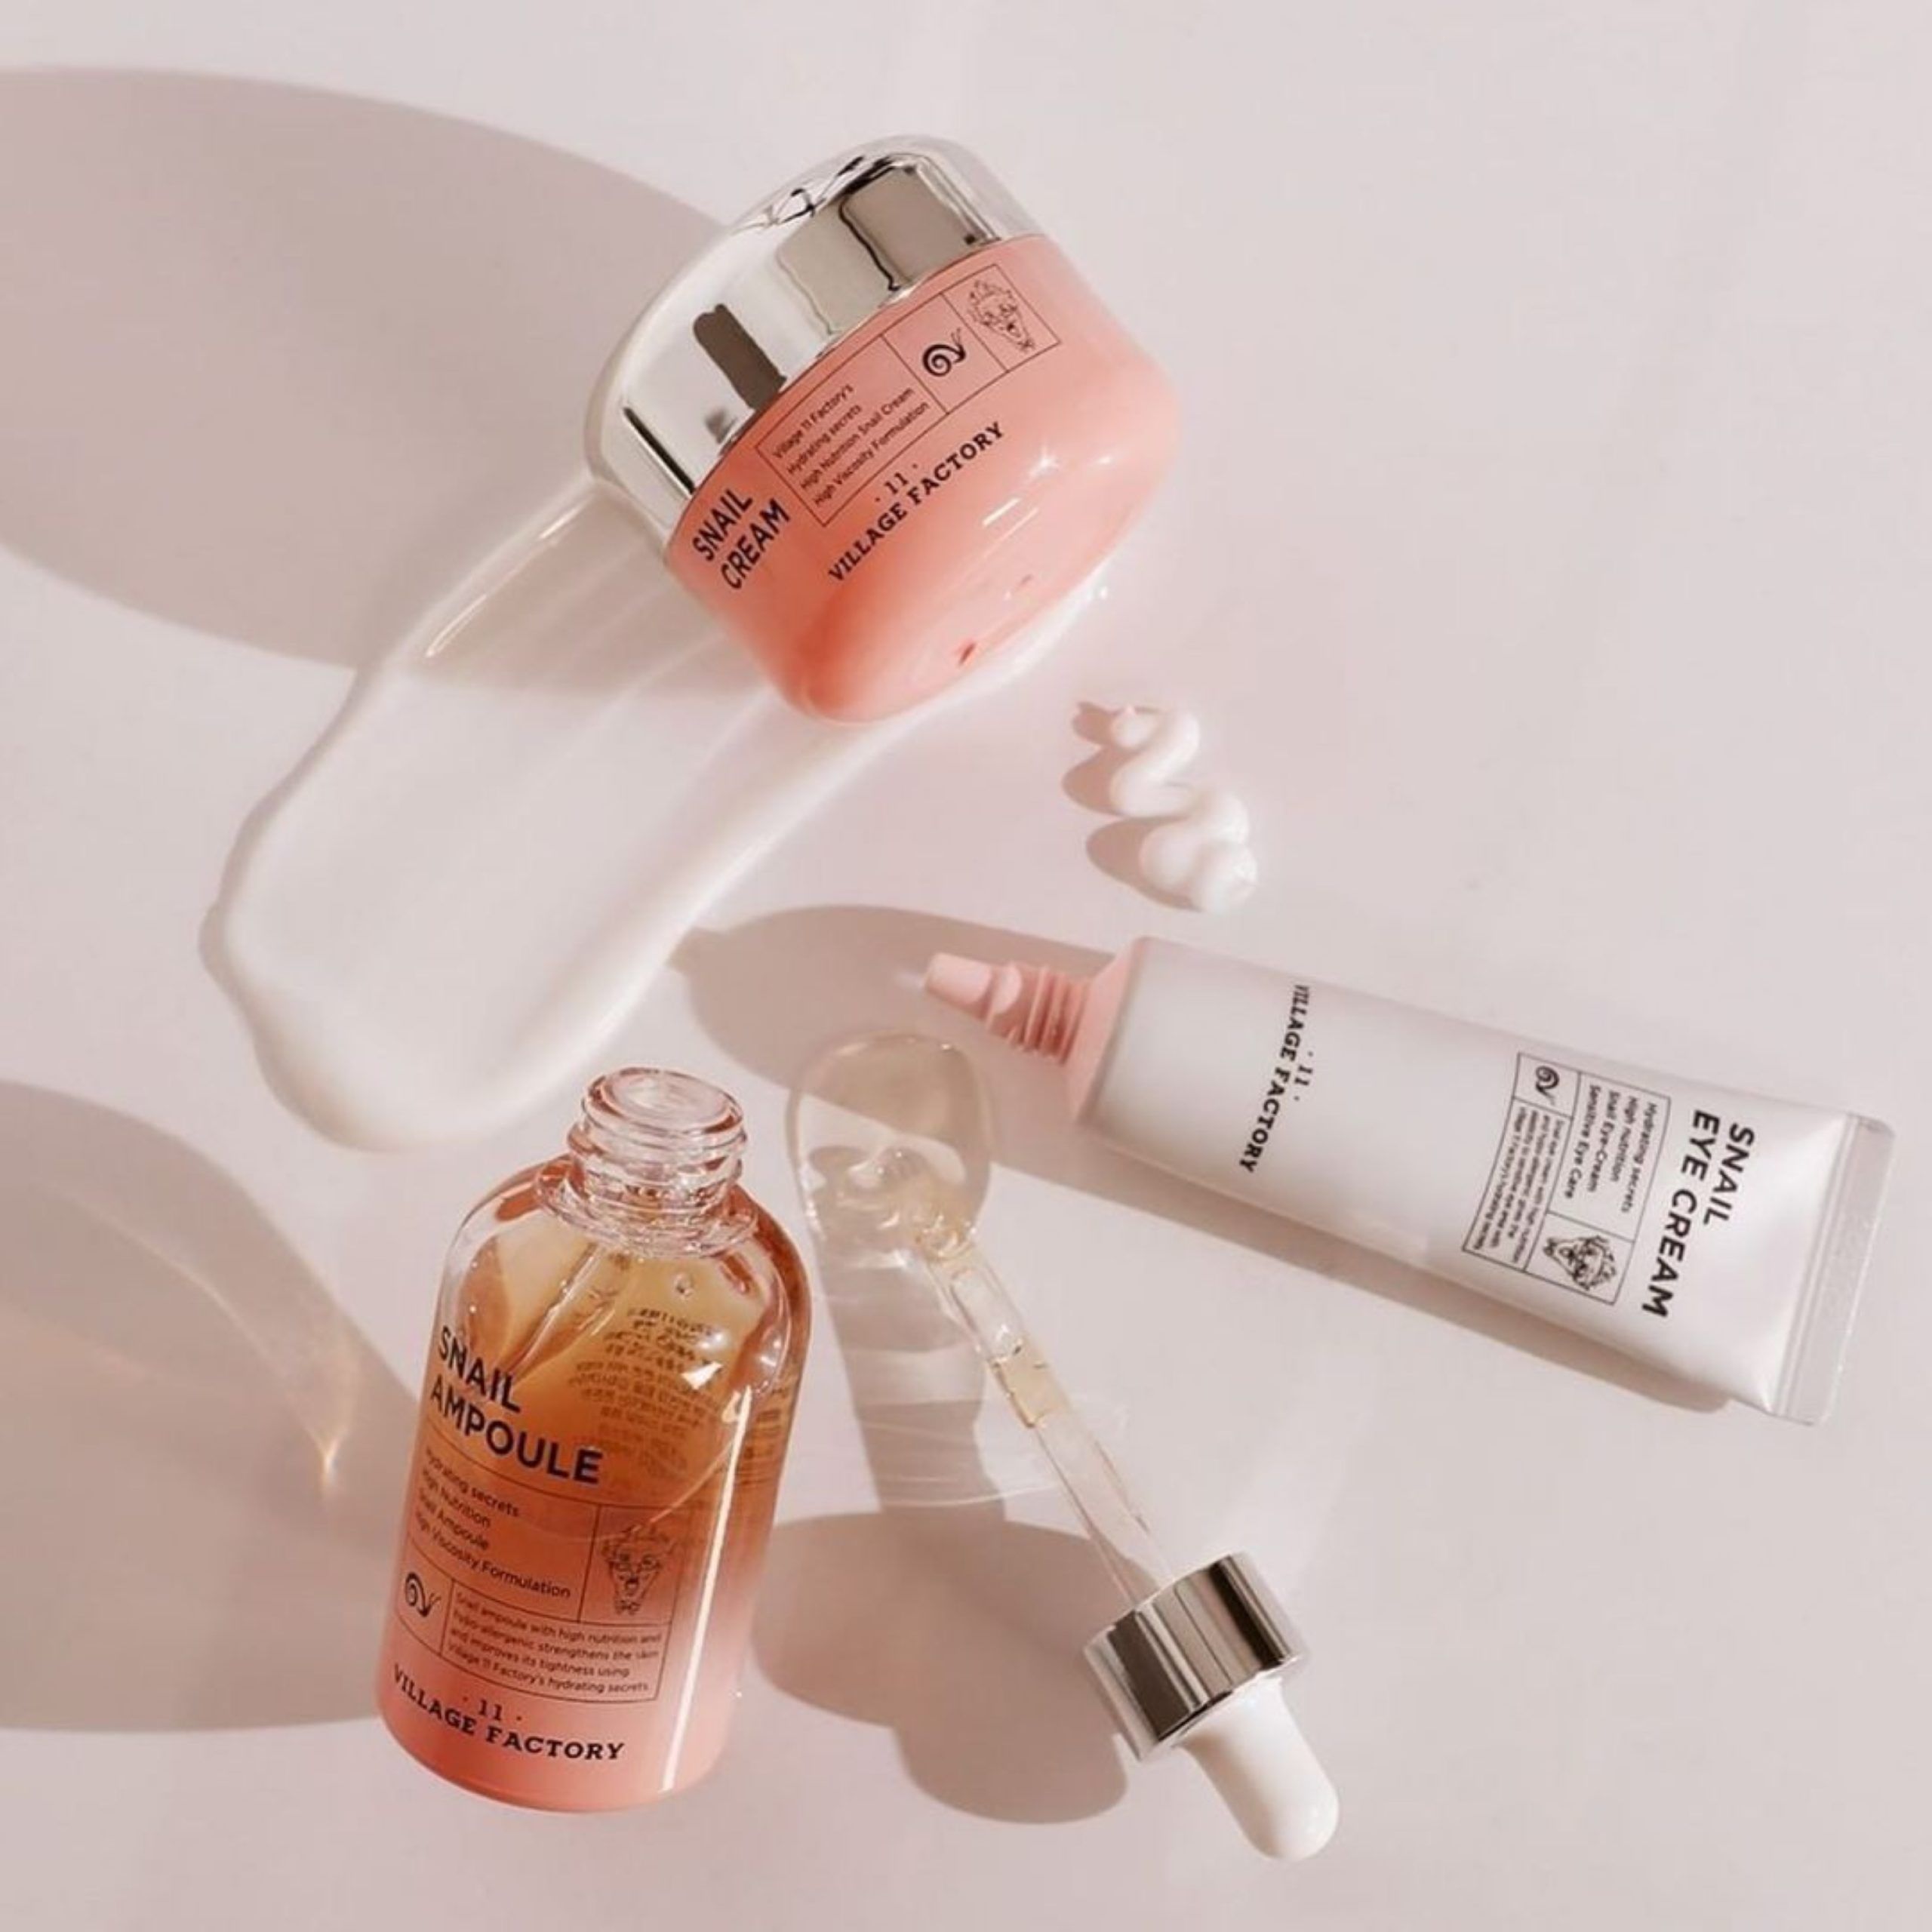 K-beauty lovers check out these snail mucin product available in India